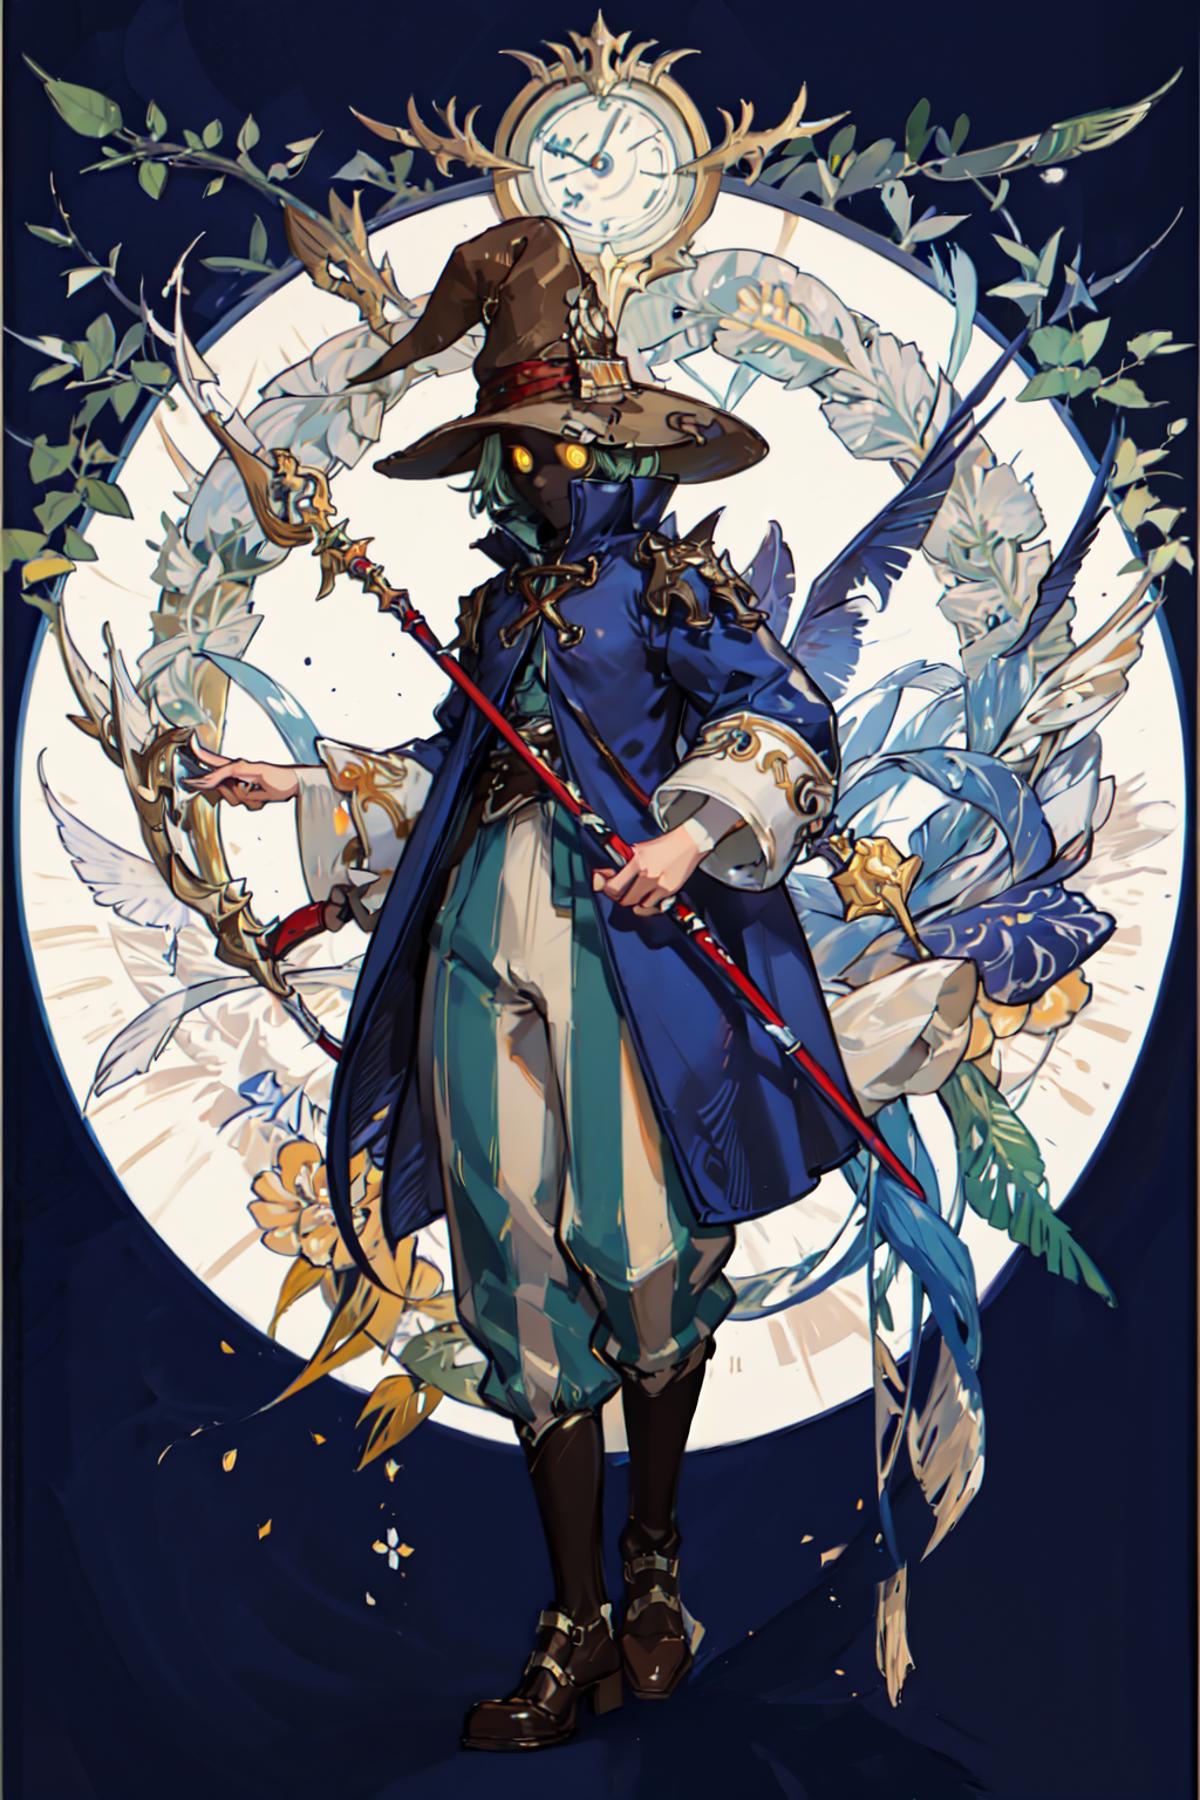 A character wearing a blue jacket and a wizard hat holding a staff.